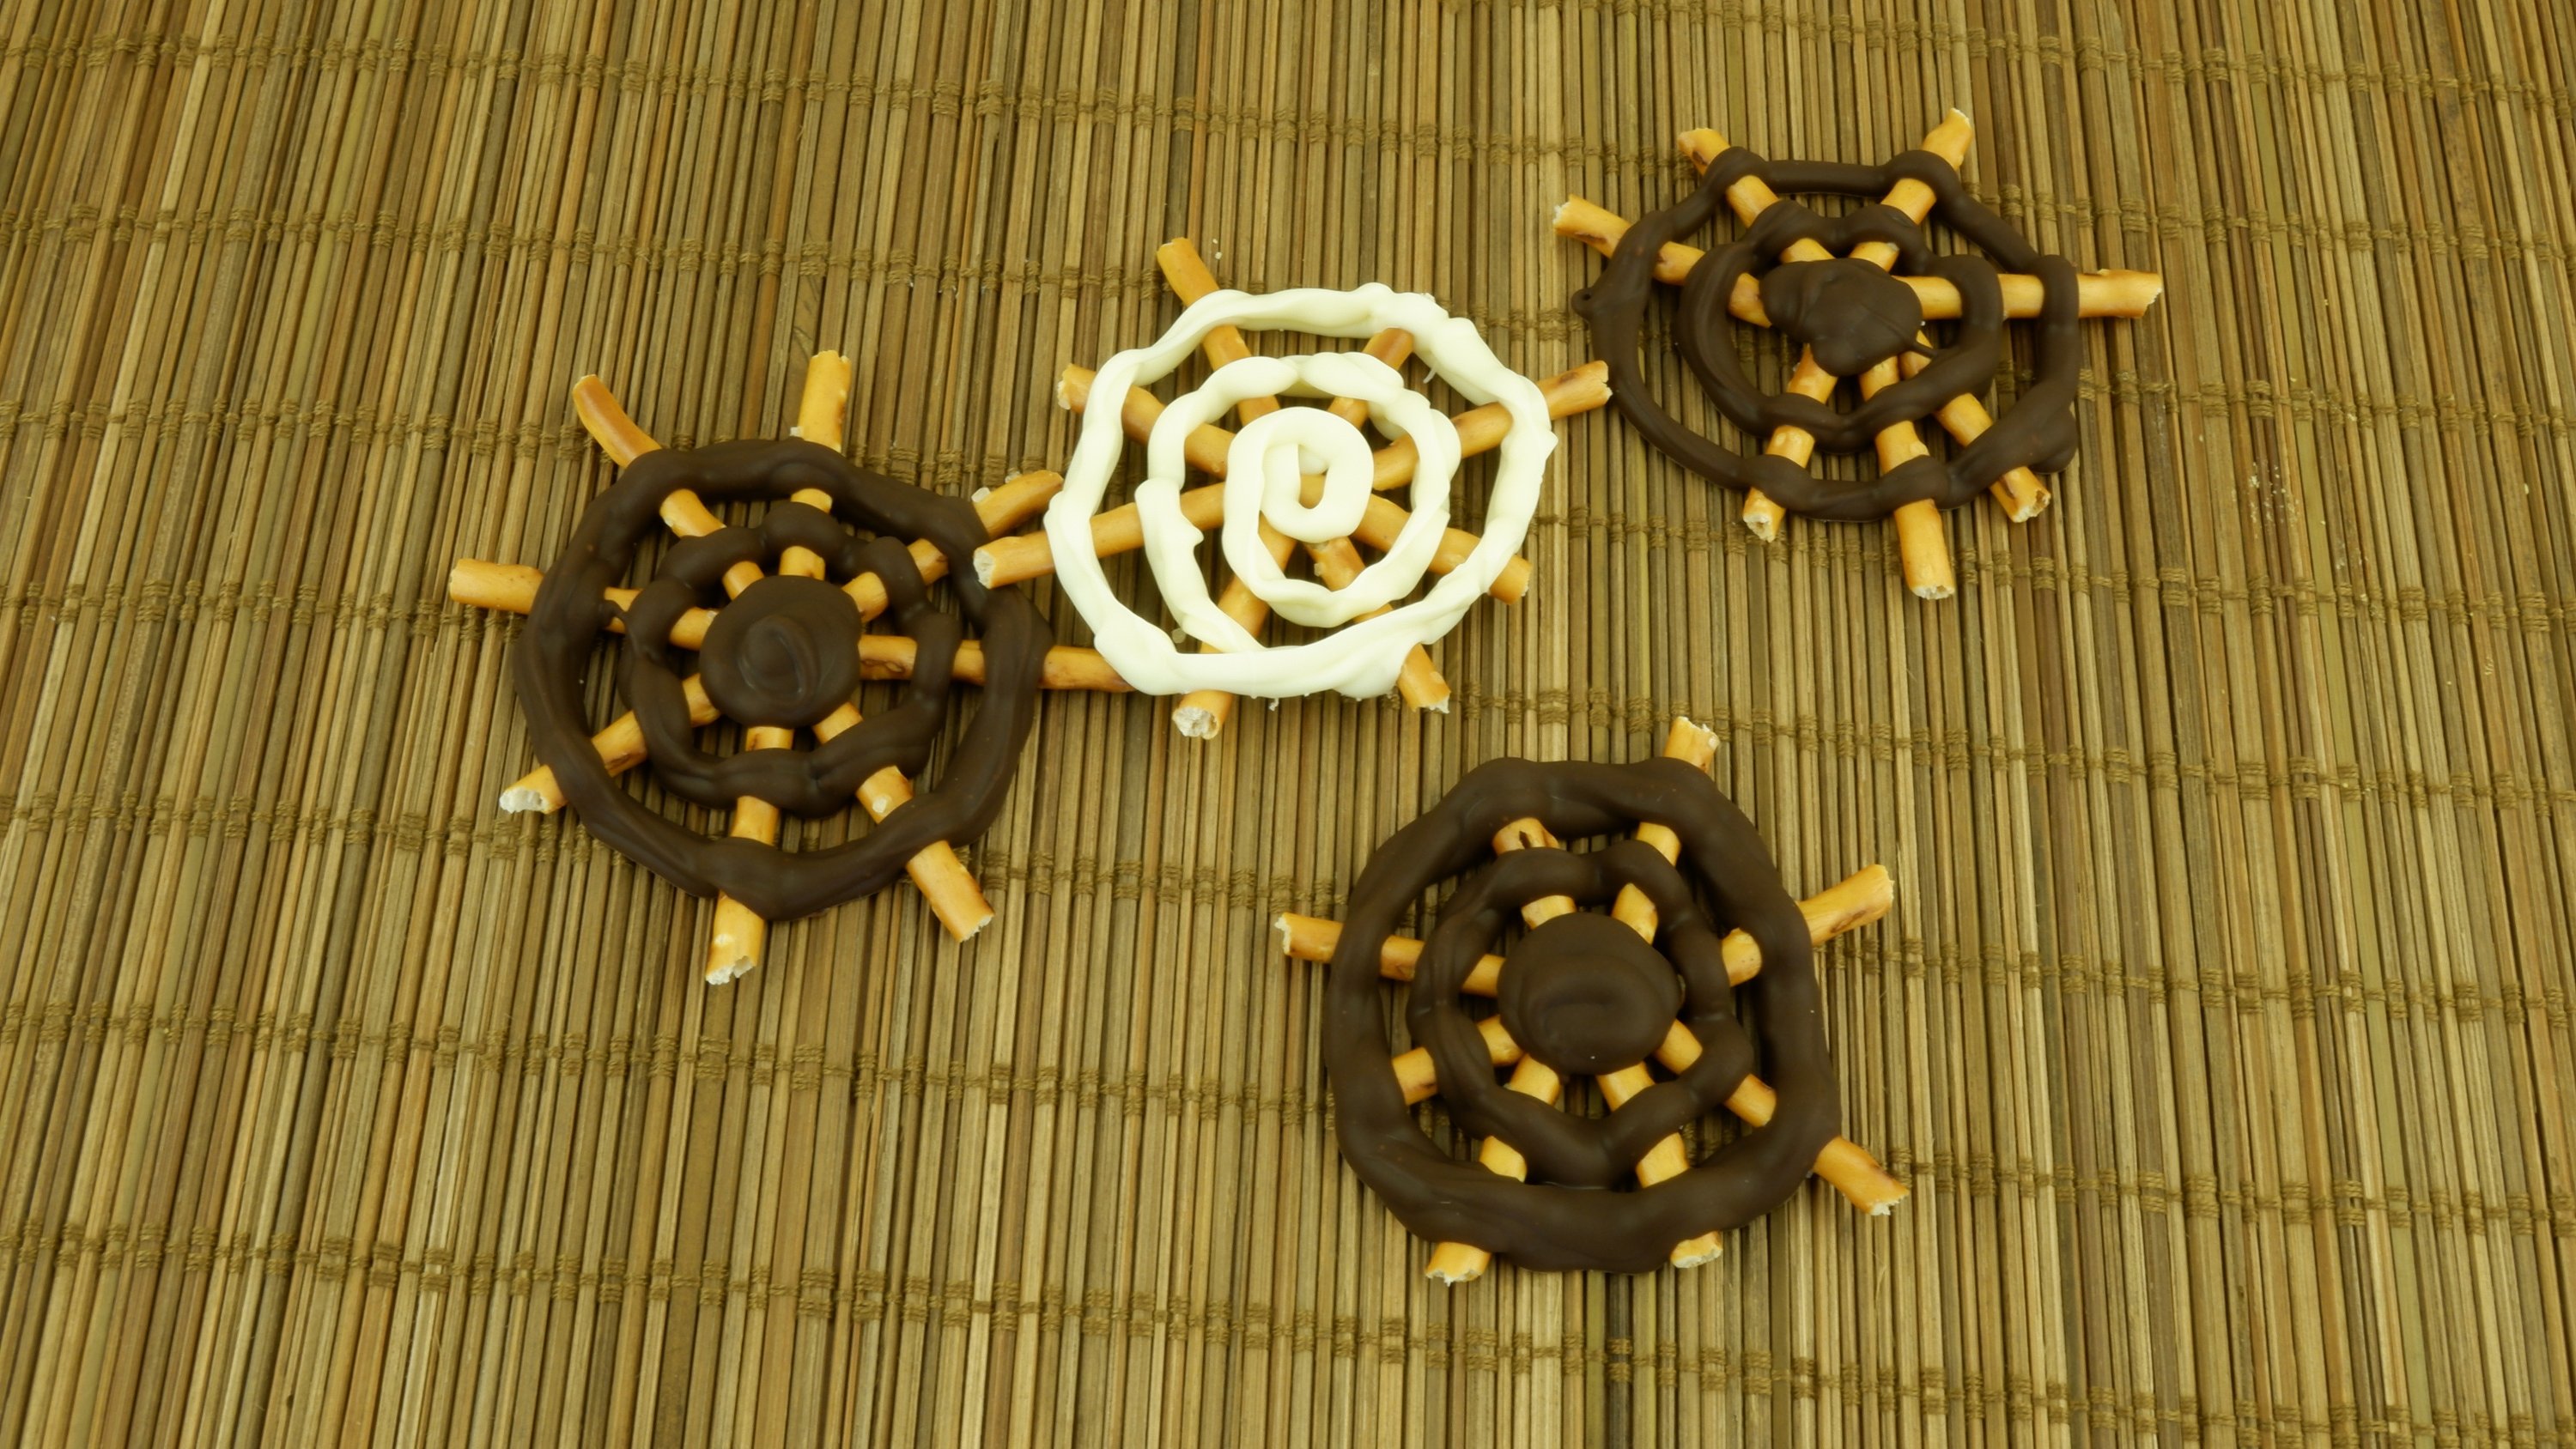 For a quick and easy snack, assemble pretzels in the shape of a snowflake and create webs from chocolate. (Photo by Ayla Coşkun)